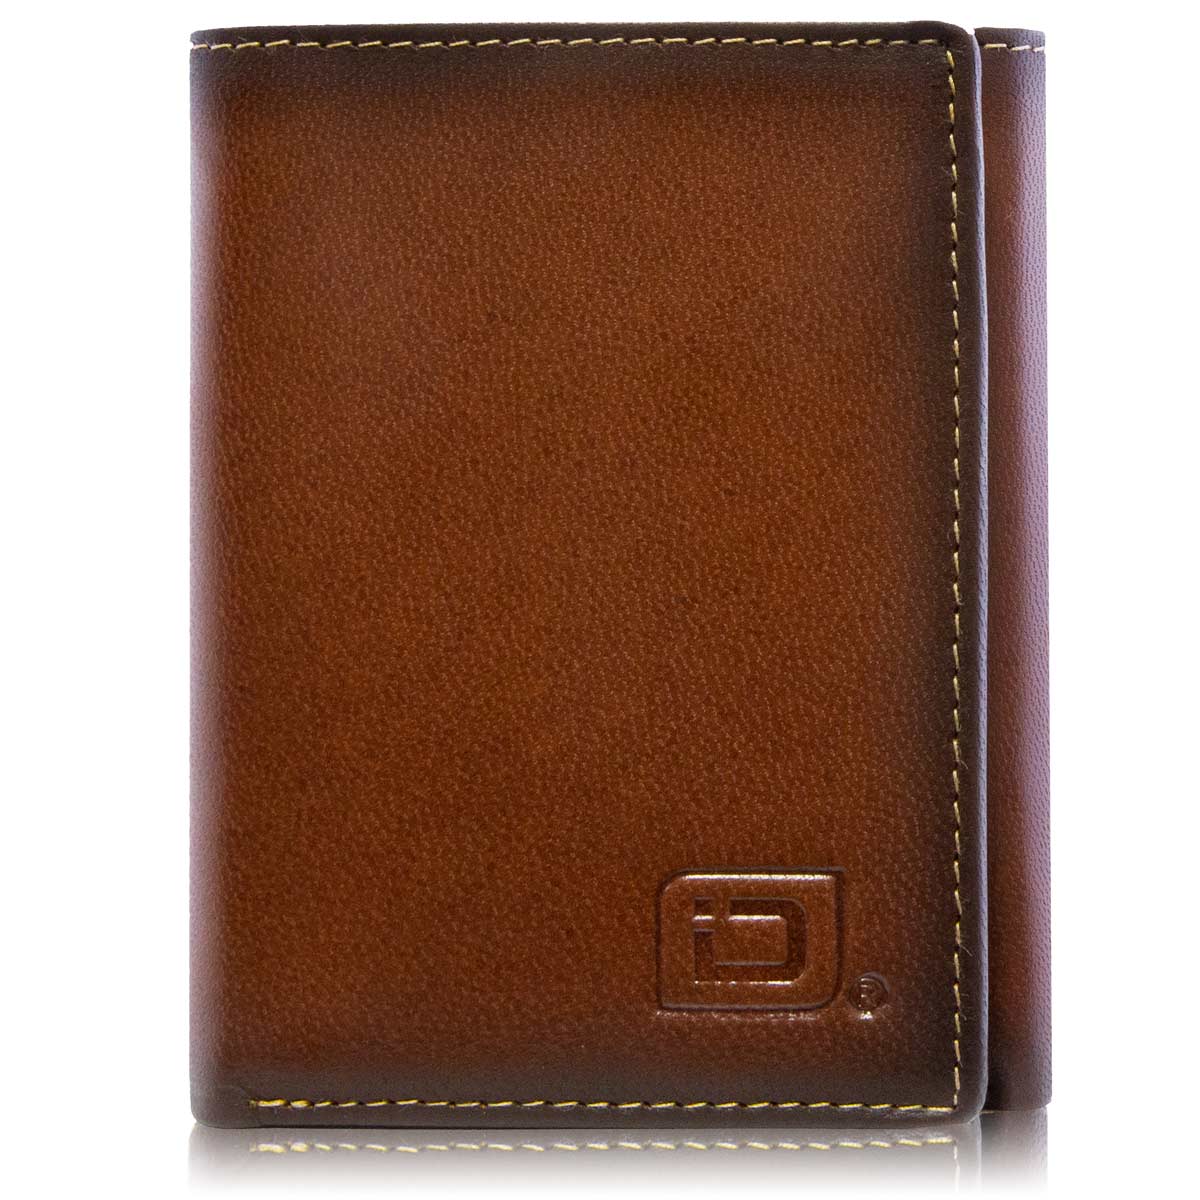 Mens RFID Wallet - Extra Capacity Trifold 8 slot with ID Window